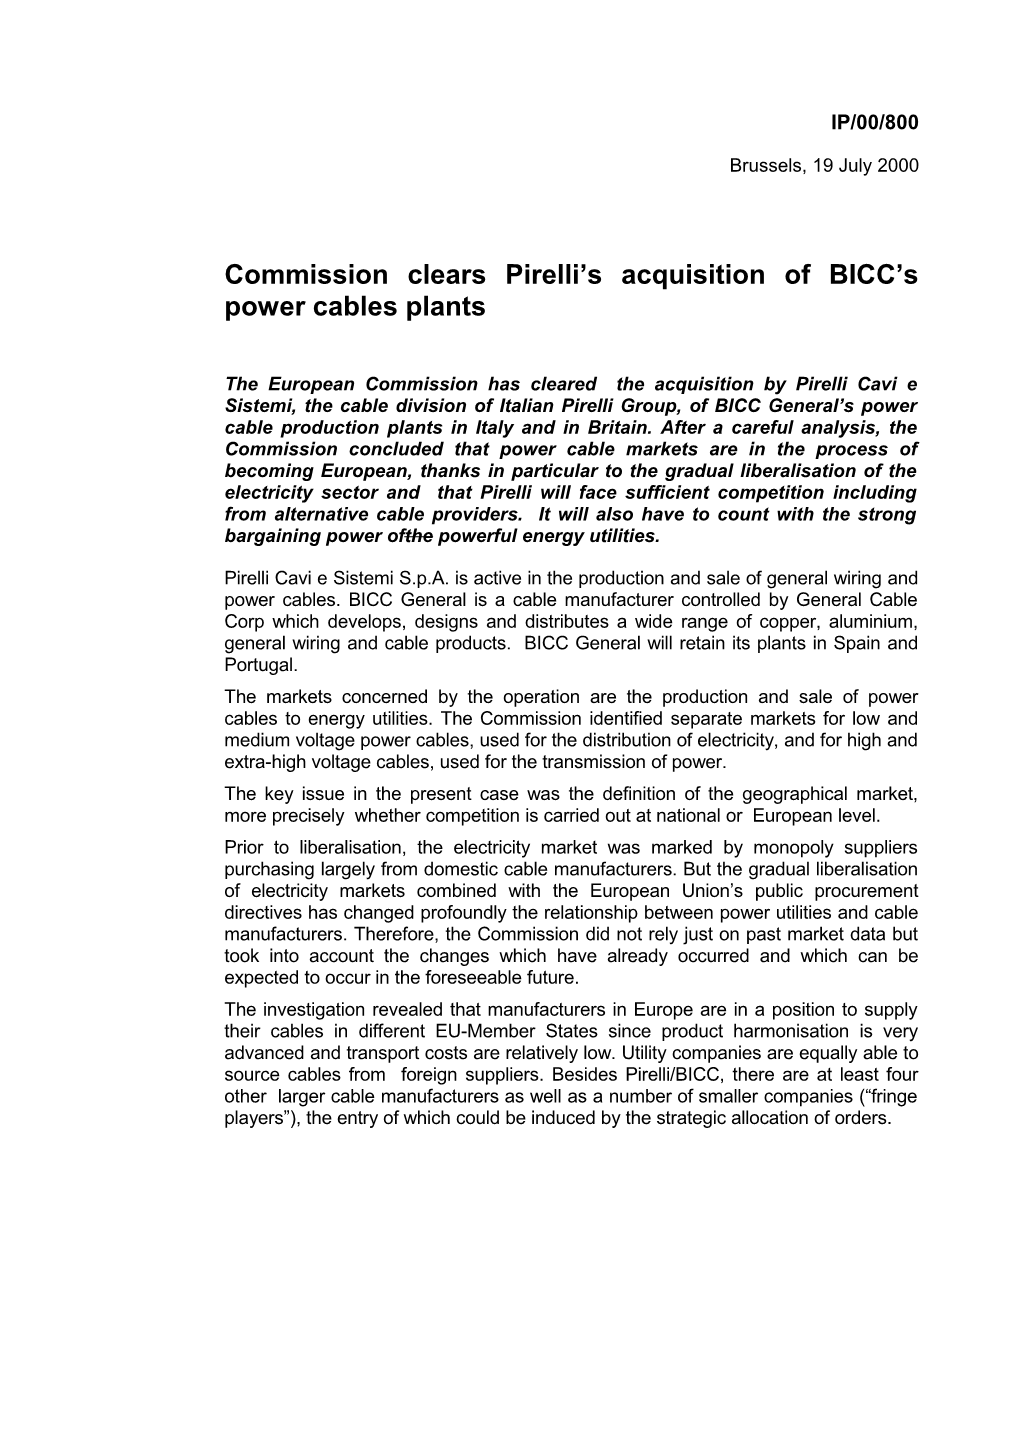 Commission Clears Pirelli S Acquisition of BICC S Power Cables Plants